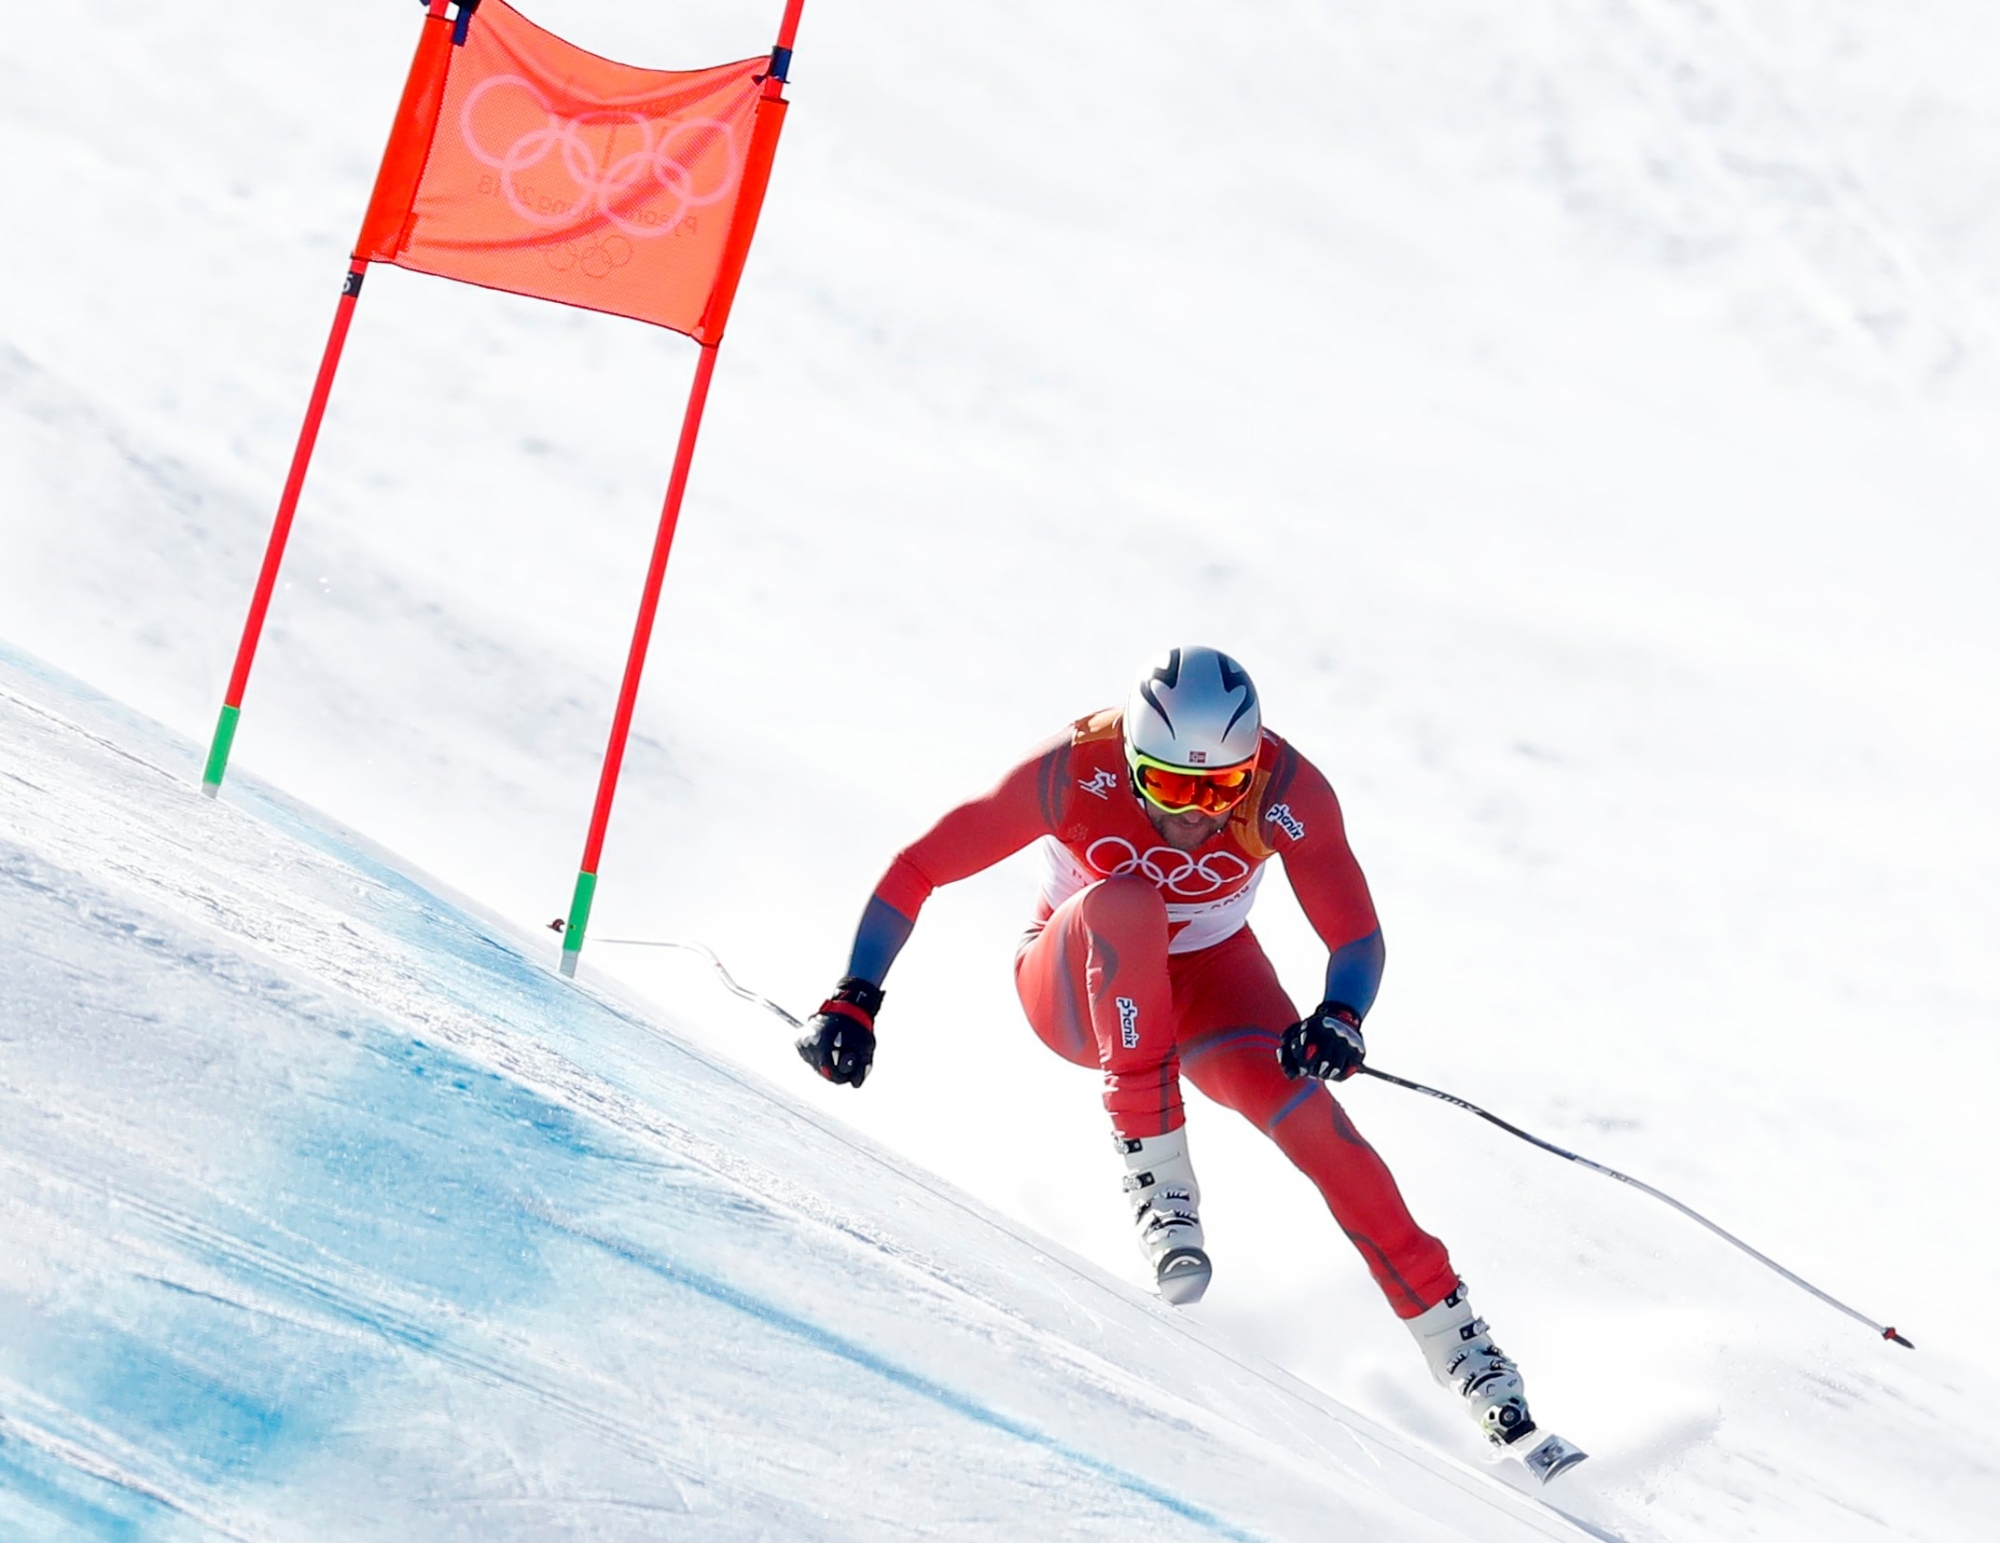 epa06526519 Aksel Lund Svindal of Norway speeds down the slope during the Men's Downhill race at the Jeongseon Alpine Centre during the PyeongChang 2018 Olympic Games, South Korea, 15 February 2018.  EPA/GUILLAUME HORCAJUELO SOUTH KOREA PYEONGCHANG 2018 OLYMPIC GAMES